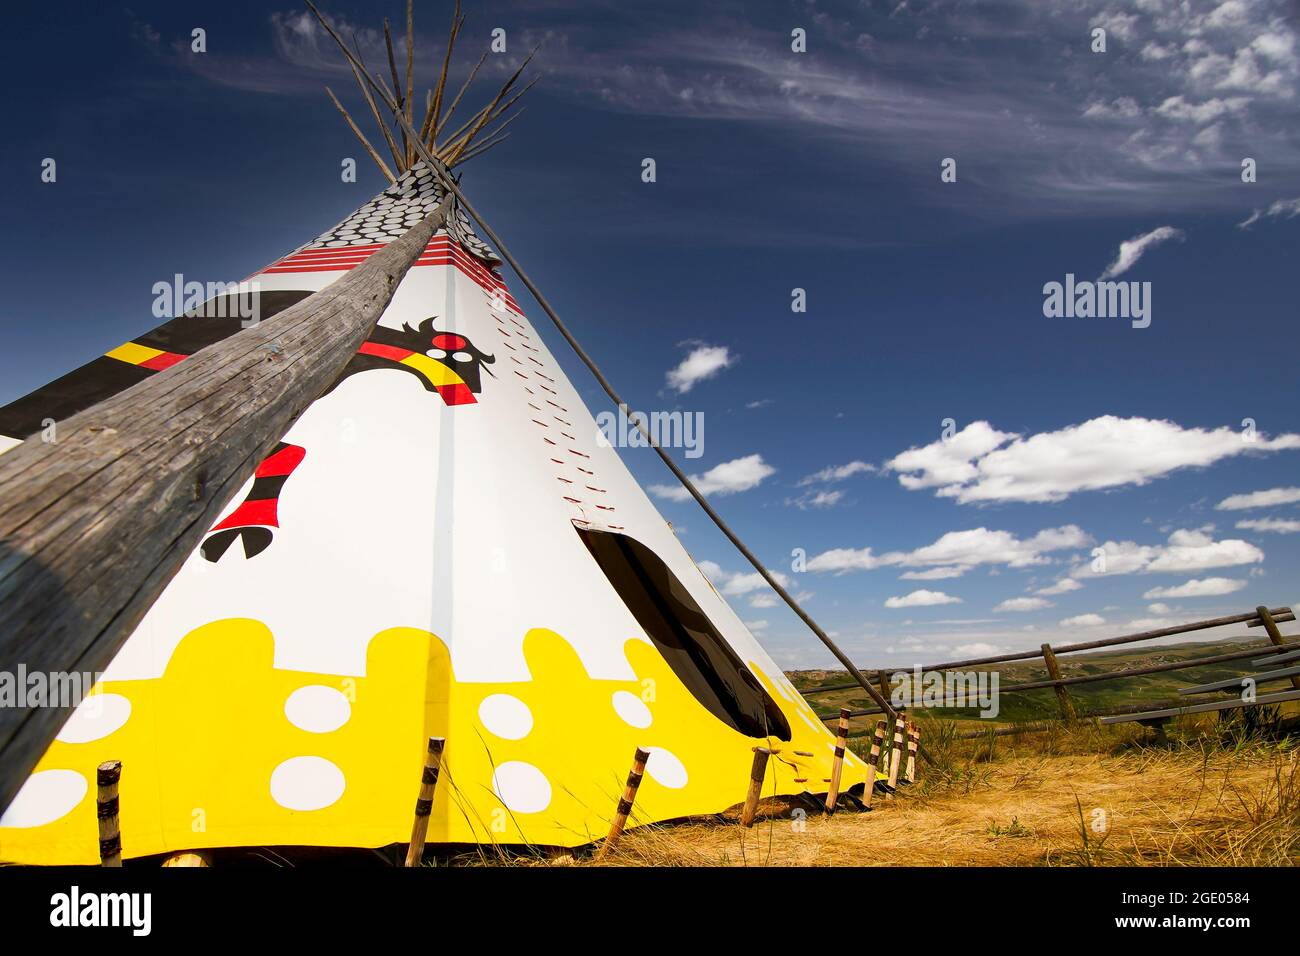 Alberta Alberta Canada, July 30 2021: An indigenous Teepee set up at Head Smashed in Buffalo Jump world heritage site under a blue summer sky. Stock Photo